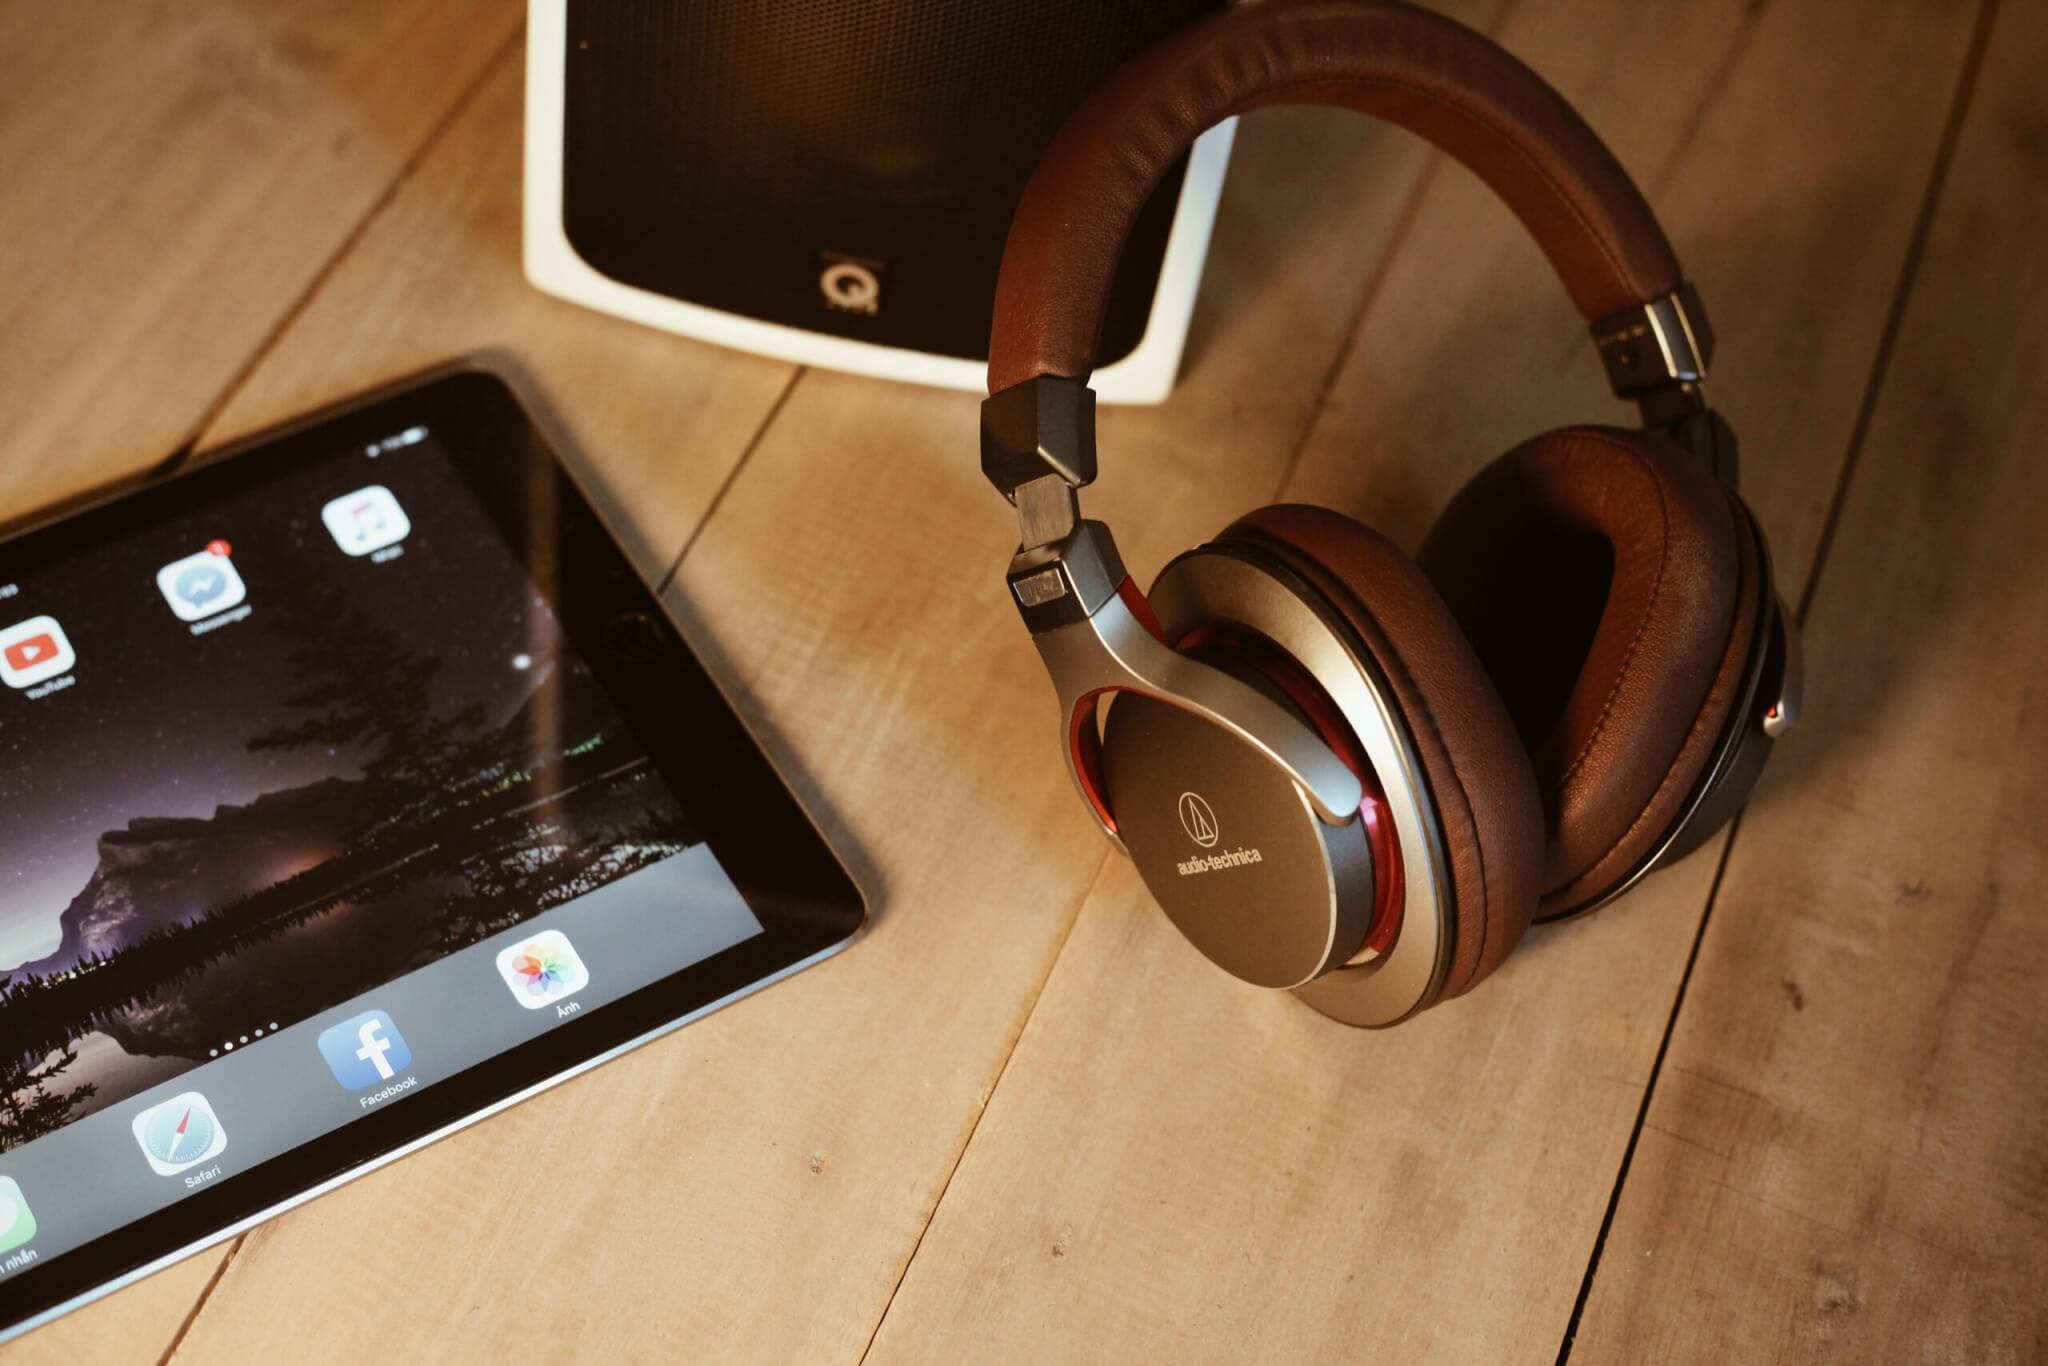 Tablet and Headphones